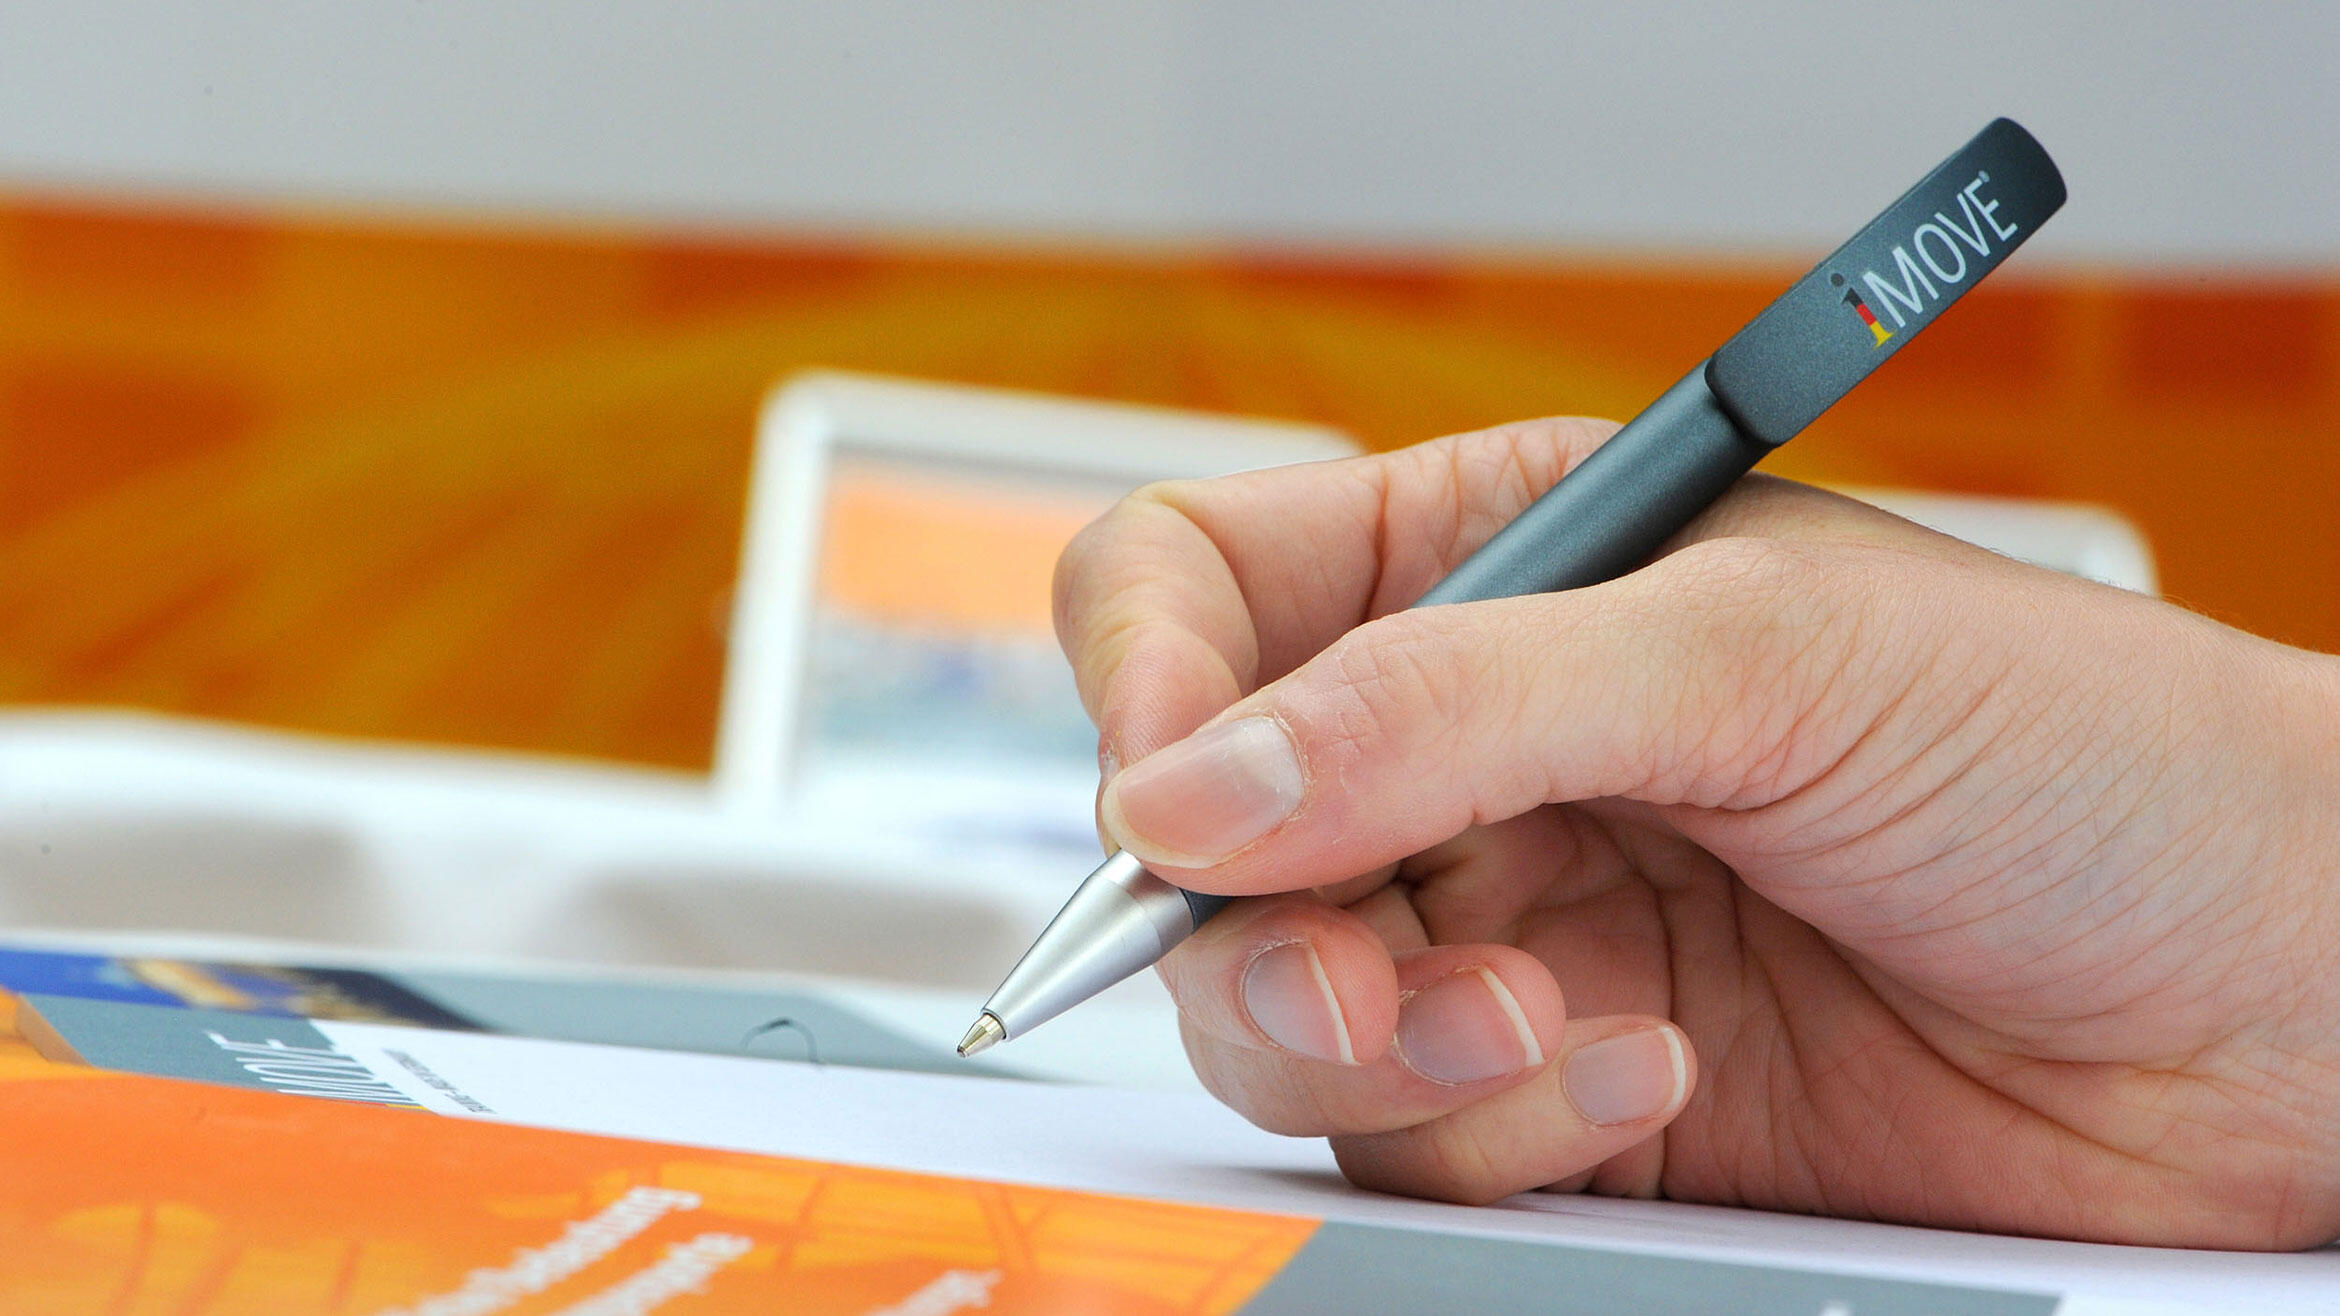 detailed view: hand writing with iMOVE pen